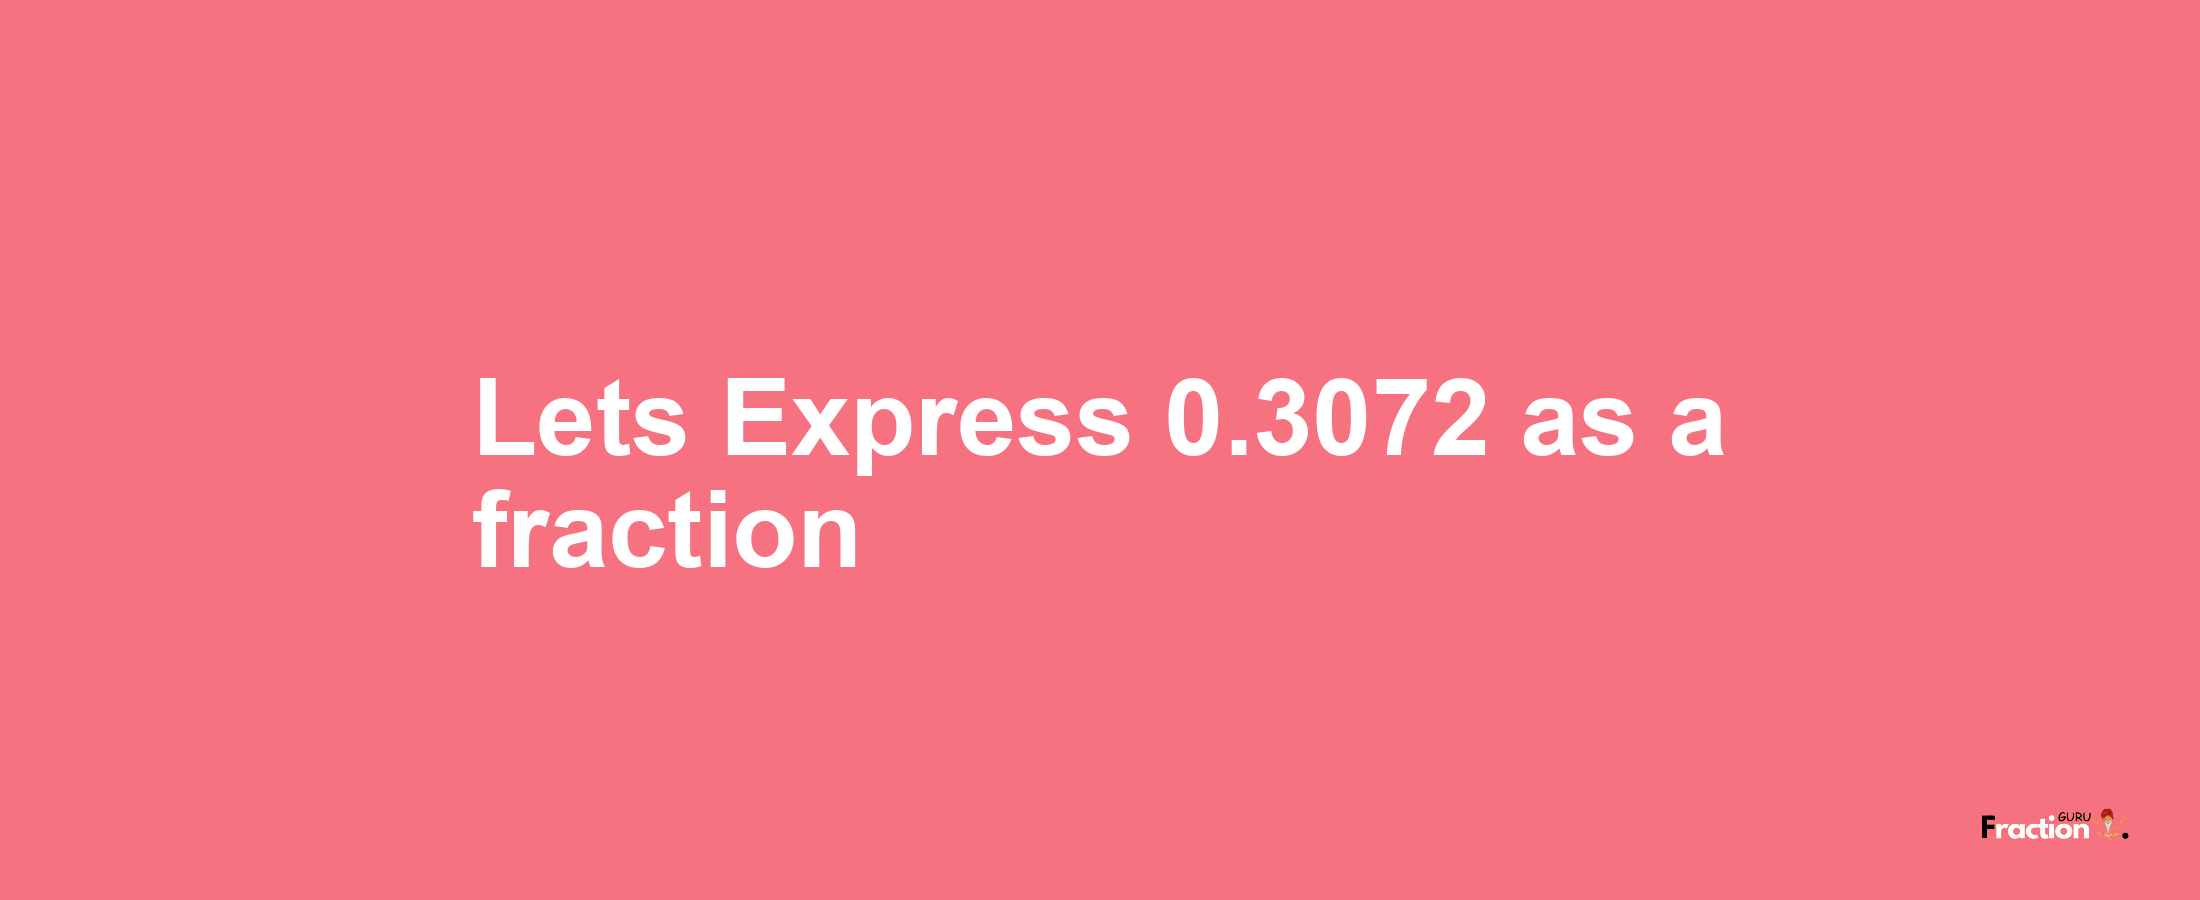 Lets Express 0.3072 as afraction